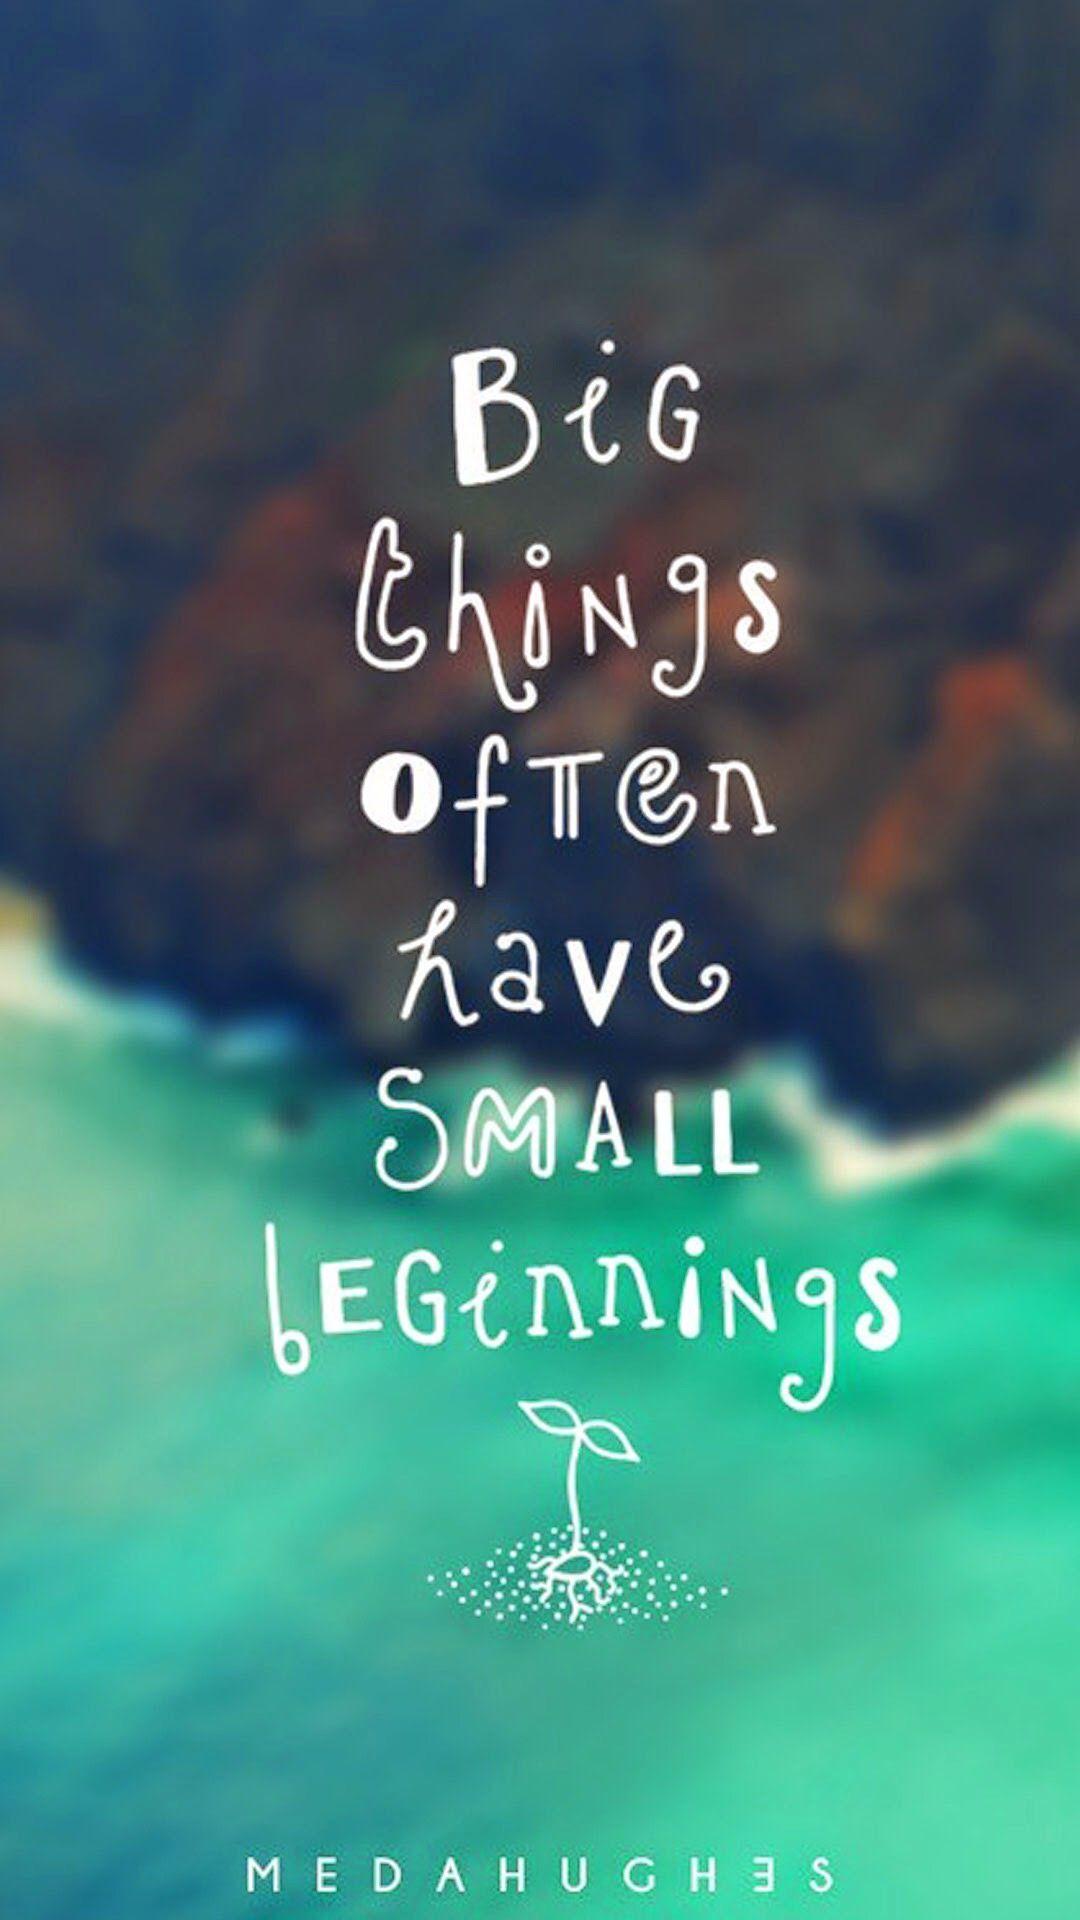 Small Beginning. Inspirational quotes, Best inspirational quotes, Positive quotes